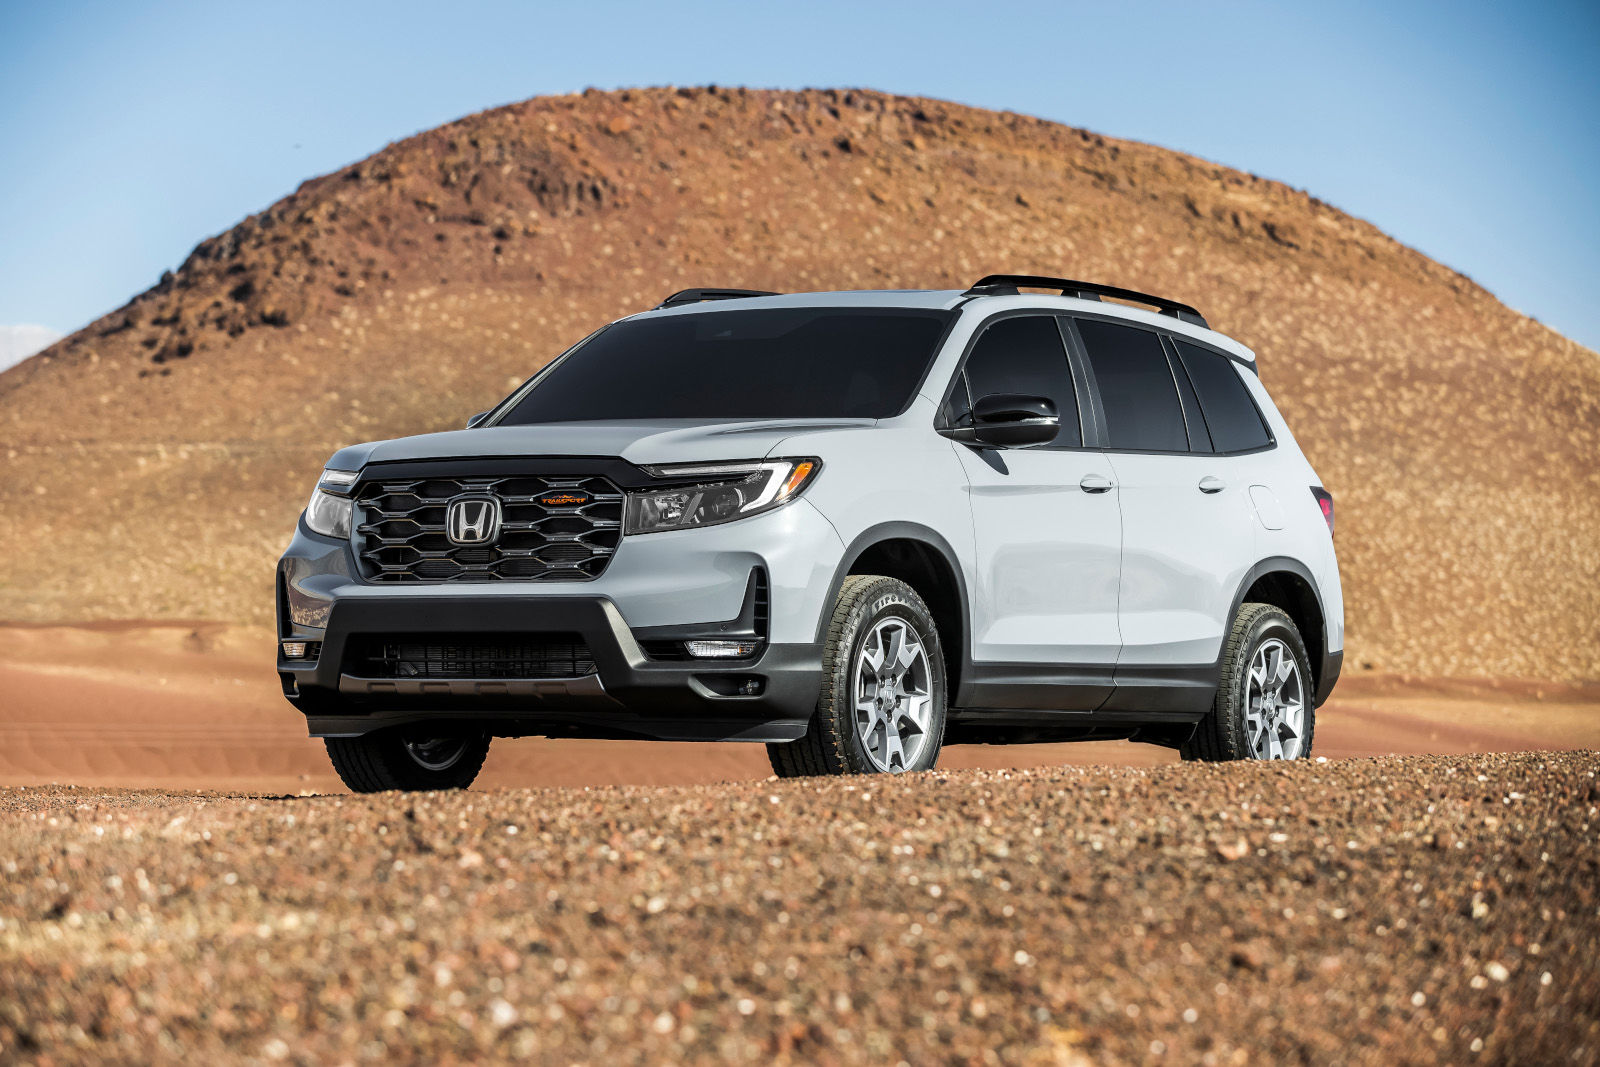 Honda Passport Tops Residual Value Rankings in Mid-Size SUV Category